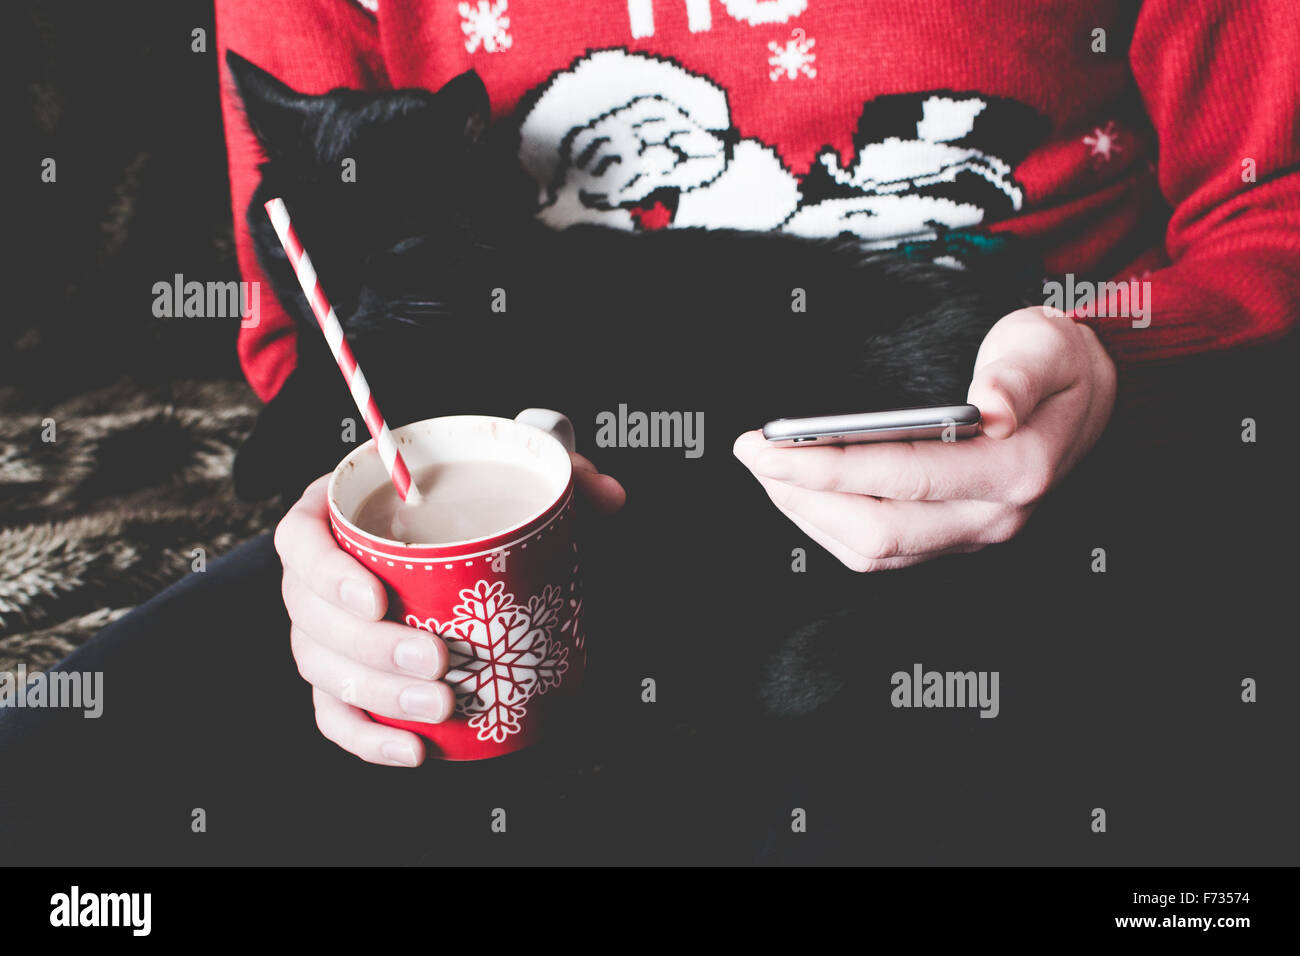 Man wearing a Christmas jumper and using his smartphone Stock Photo